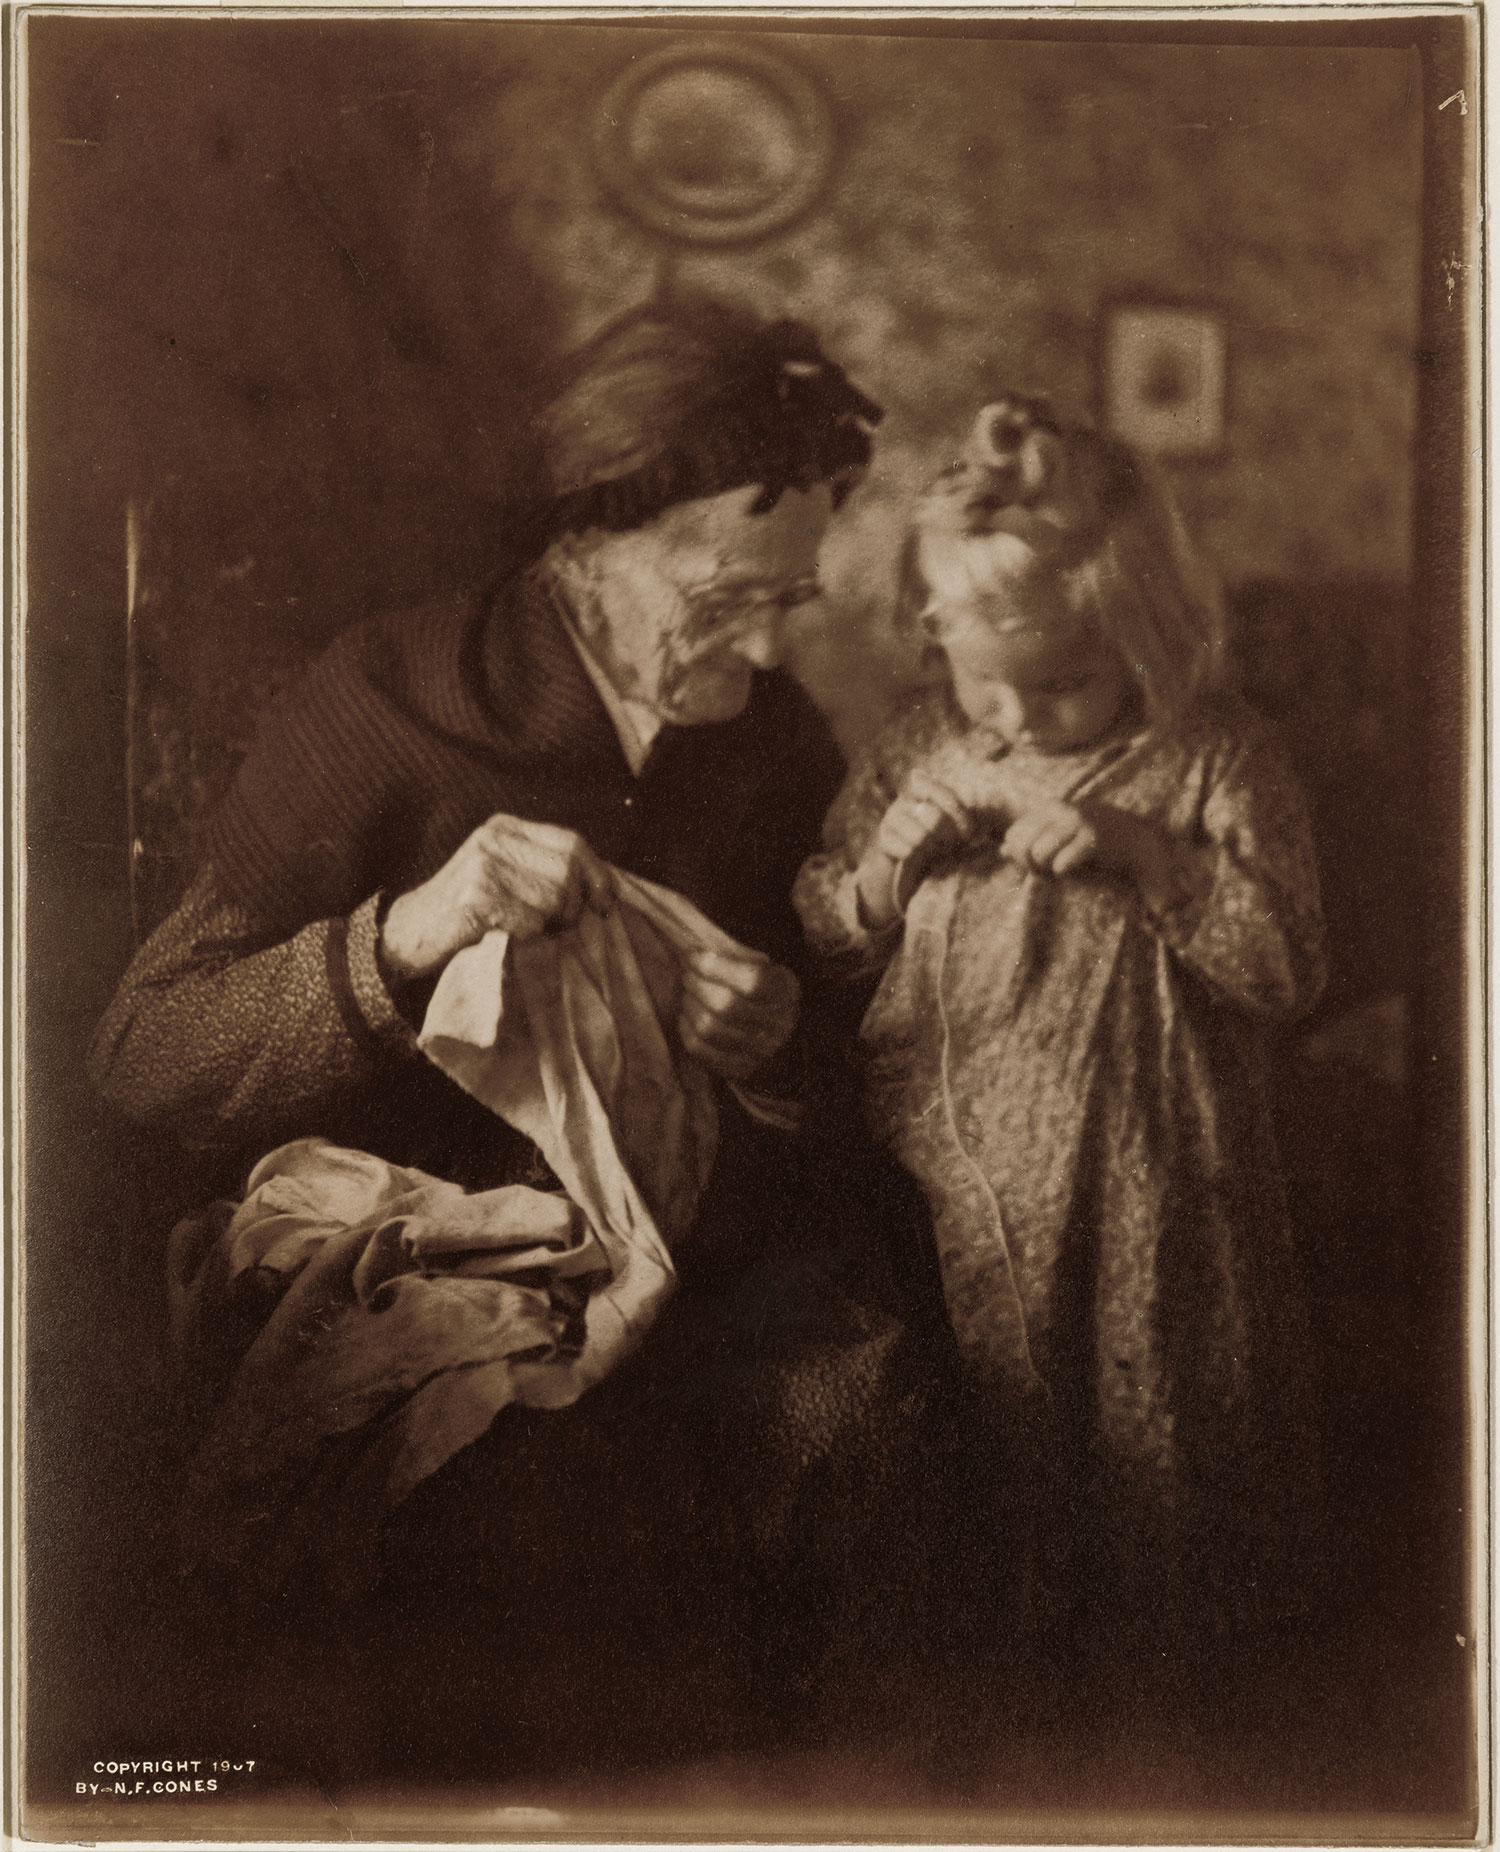 Nancy Ford Cones (American, 1869–1962), Threading the Needle or Helping Grandmother Sew, 1905 (printed 1907), gelatin silver print. Dayton Art Institute, Gift of Miss Jane Reece, 1952.19.495